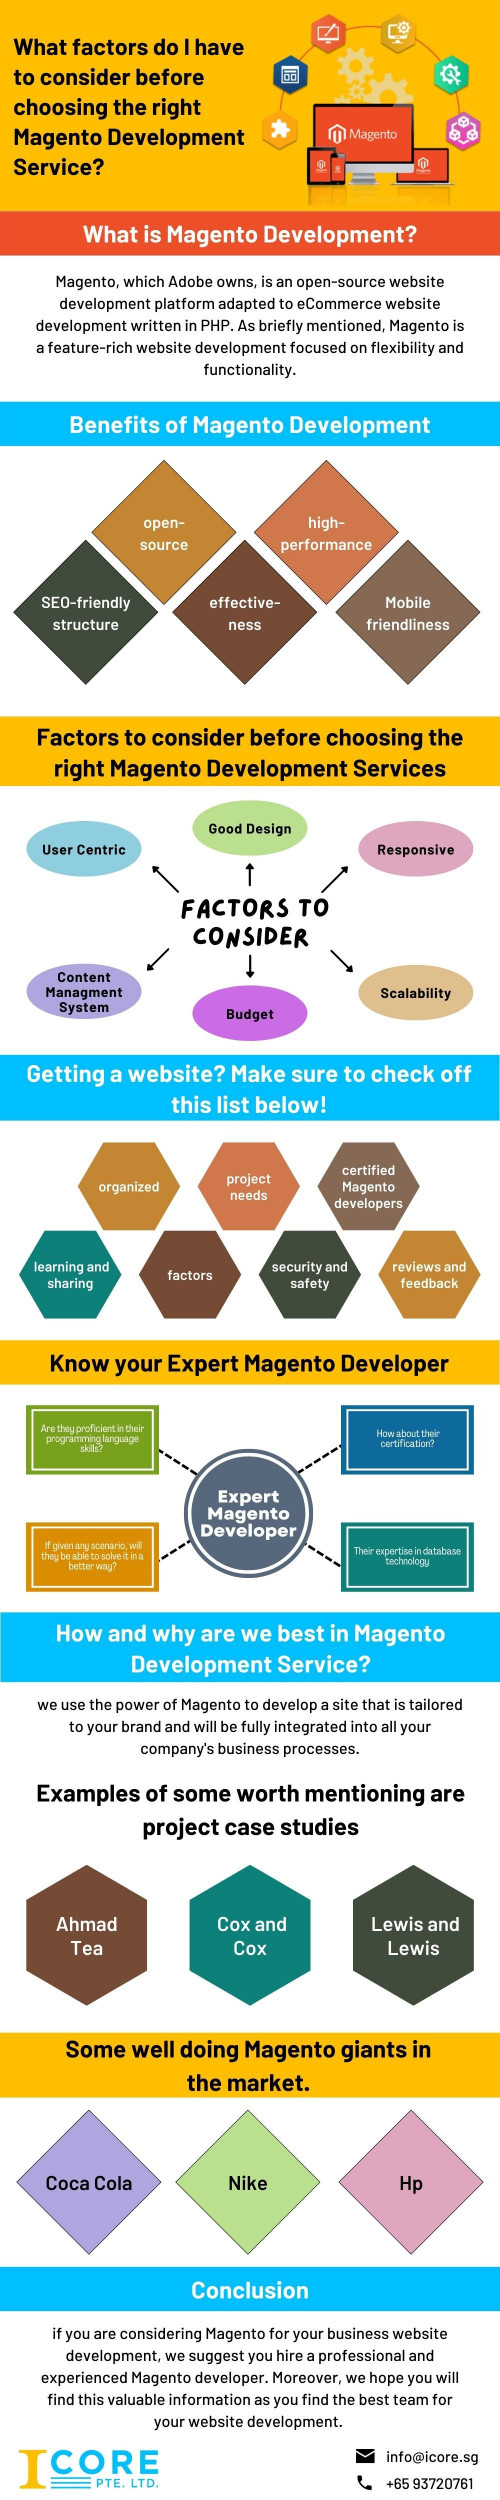 Choosing the right platform for Magento Service becomes more vital when you are planning to offer advanced and functional eCommerce solutions.

visit now- https://icore.sg/factors-to-consider-before-choosing-right-magento-service/